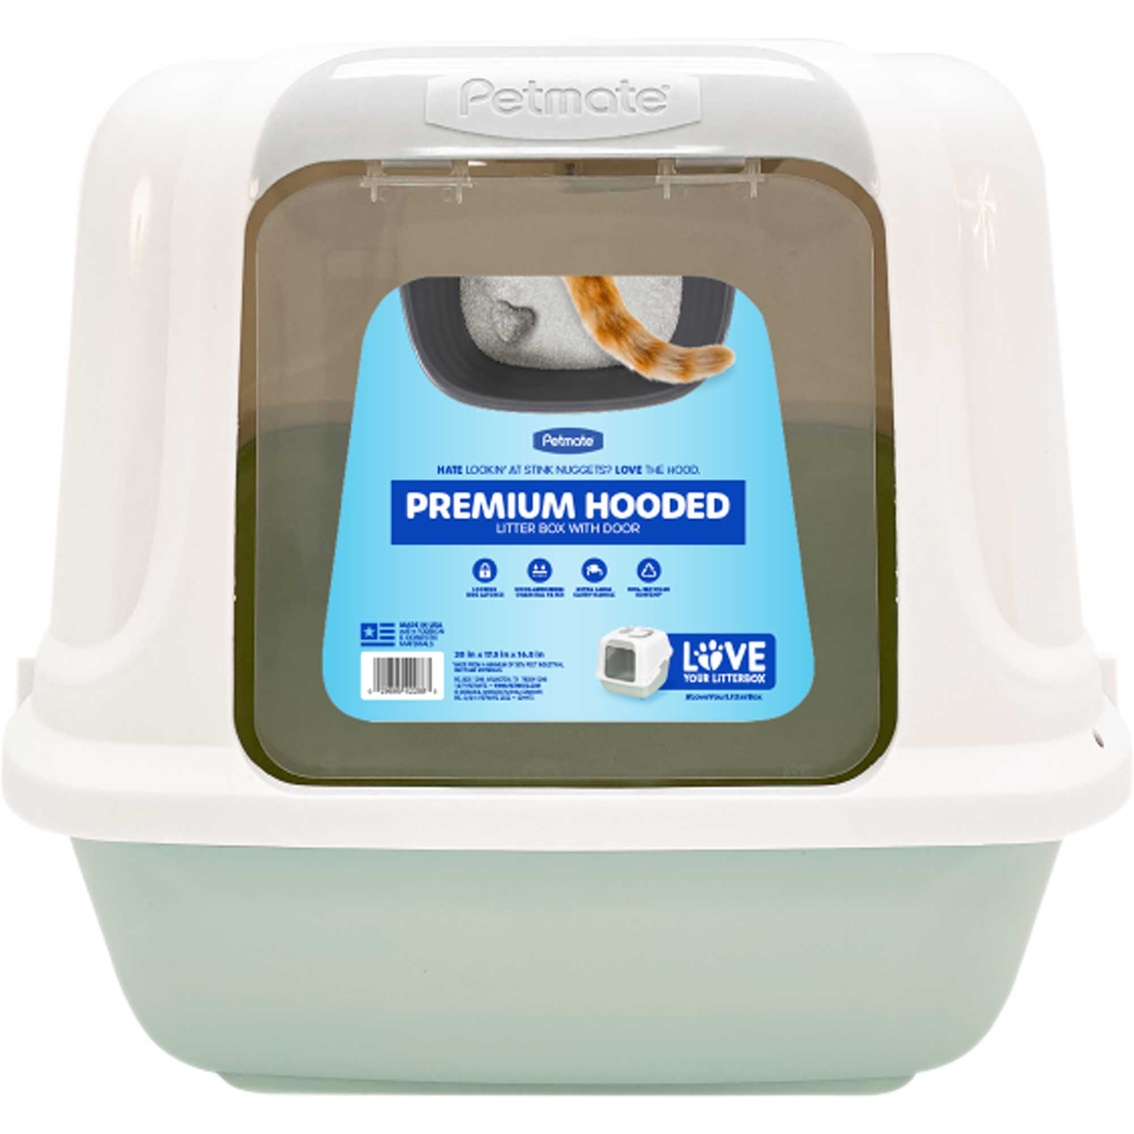 Petmate Premium Hooded Litter Box with Door, Large - Image 2 of 4